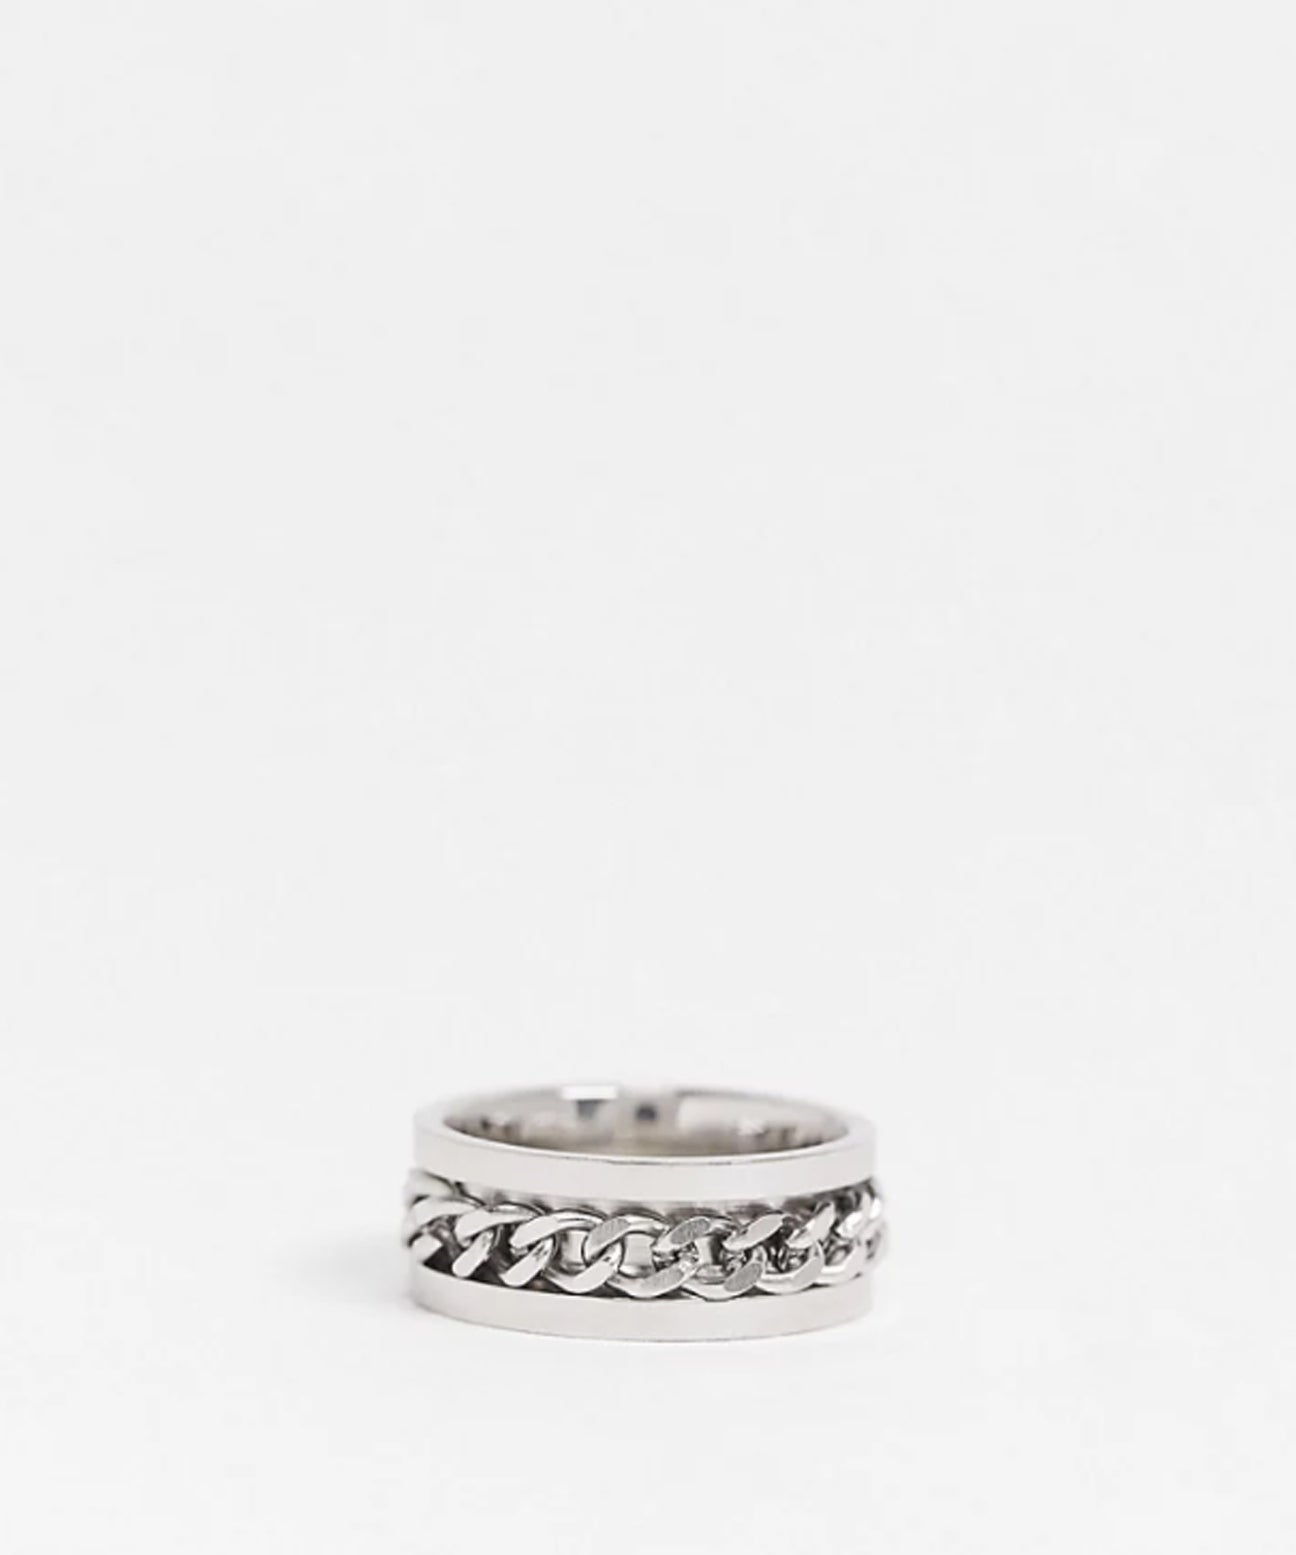 Chain Embelished Ring in Silver - svnx